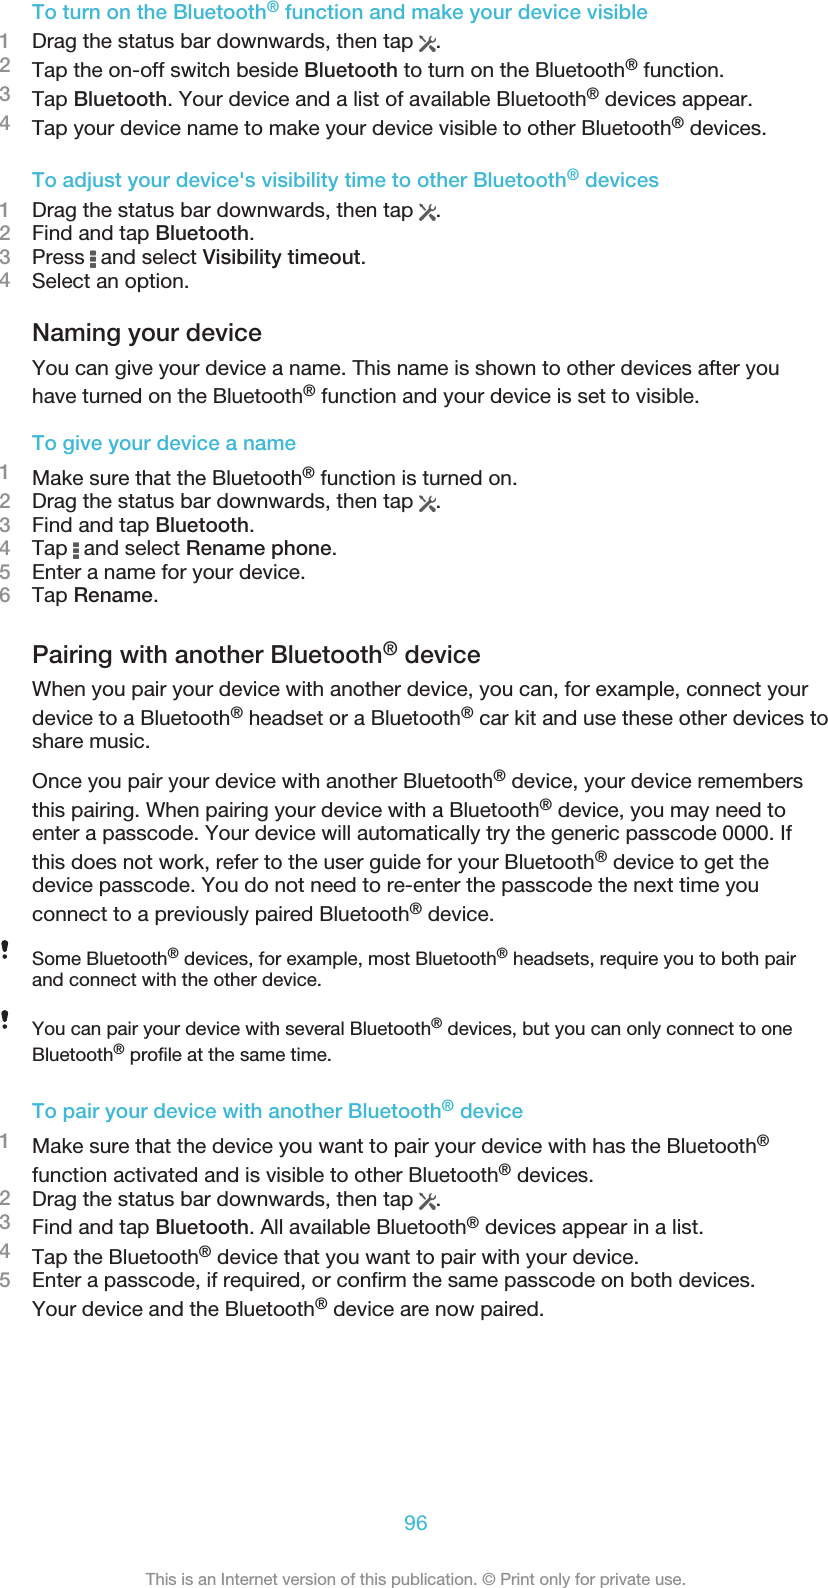 To turn on the Bluetooth® function and make your device visible1Drag the status bar downwards, then tap  .2Tap the on-off switch beside Bluetooth to turn on the Bluetooth® function.3Tap Bluetooth. Your device and a list of available Bluetooth® devices appear.4Tap your device name to make your device visible to other Bluetooth® devices.To adjust your device&apos;s visibility time to other Bluetooth® devices1Drag the status bar downwards, then tap  .2Find and tap Bluetooth.3Press   and select Visibility timeout.4Select an option.Naming your deviceYou can give your device a name. This name is shown to other devices after youhave turned on the Bluetooth® function and your device is set to visible.To give your device a name1Make sure that the Bluetooth® function is turned on.2Drag the status bar downwards, then tap  .3Find and tap Bluetooth.4Tap   and select Rename phone.5Enter a name for your device.6Tap Rename.Pairing with another Bluetooth® deviceWhen you pair your device with another device, you can, for example, connect yourdevice to a Bluetooth® headset or a Bluetooth® car kit and use these other devices toshare music.Once you pair your device with another Bluetooth® device, your device remembersthis pairing. When pairing your device with a Bluetooth® device, you may need toenter a passcode. Your device will automatically try the generic passcode 0000. Ifthis does not work, refer to the user guide for your Bluetooth® device to get thedevice passcode. You do not need to re-enter the passcode the next time youconnect to a previously paired Bluetooth® device.Some Bluetooth® devices, for example, most Bluetooth® headsets, require you to both pairand connect with the other device.You can pair your device with several Bluetooth® devices, but you can only connect to oneBluetooth® profile at the same time.To pair your device with another Bluetooth® device1Make sure that the device you want to pair your device with has the Bluetooth®function activated and is visible to other Bluetooth® devices.2Drag the status bar downwards, then tap  .3Find and tap Bluetooth. All available Bluetooth® devices appear in a list.4Tap the Bluetooth® device that you want to pair with your device.5Enter a passcode, if required, or confirm the same passcode on both devices.Your device and the Bluetooth® device are now paired.96This is an Internet version of this publication. © Print only for private use.